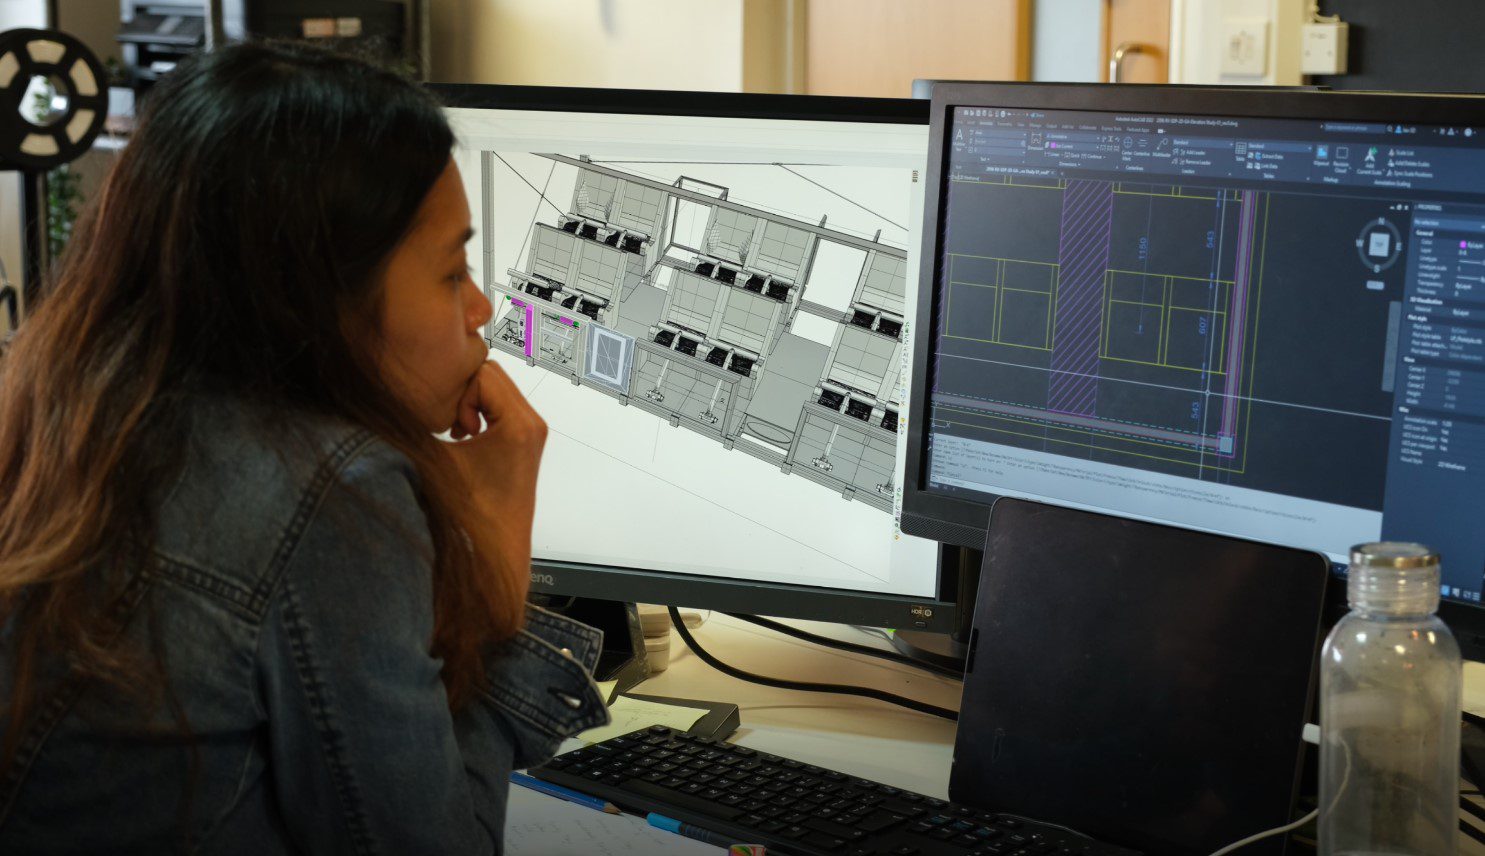 A person looking at 2 computer monitors creating concept art of a building